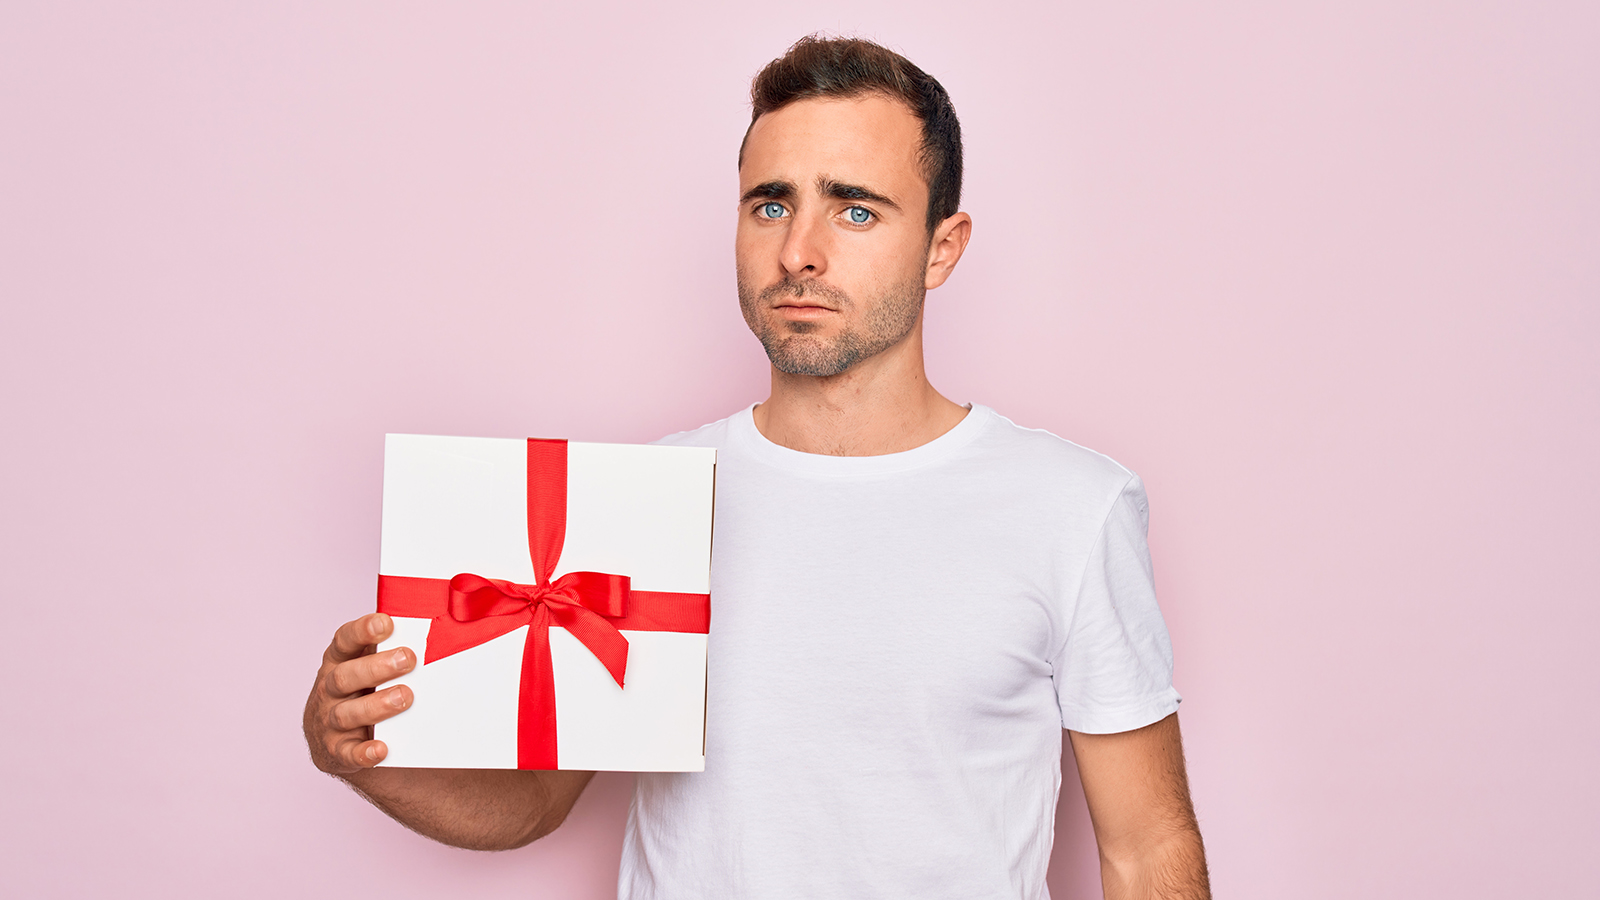 Young handsome man with blue eyes holding birthday present over isolated pink background with a confident expression on smart face thinking serious